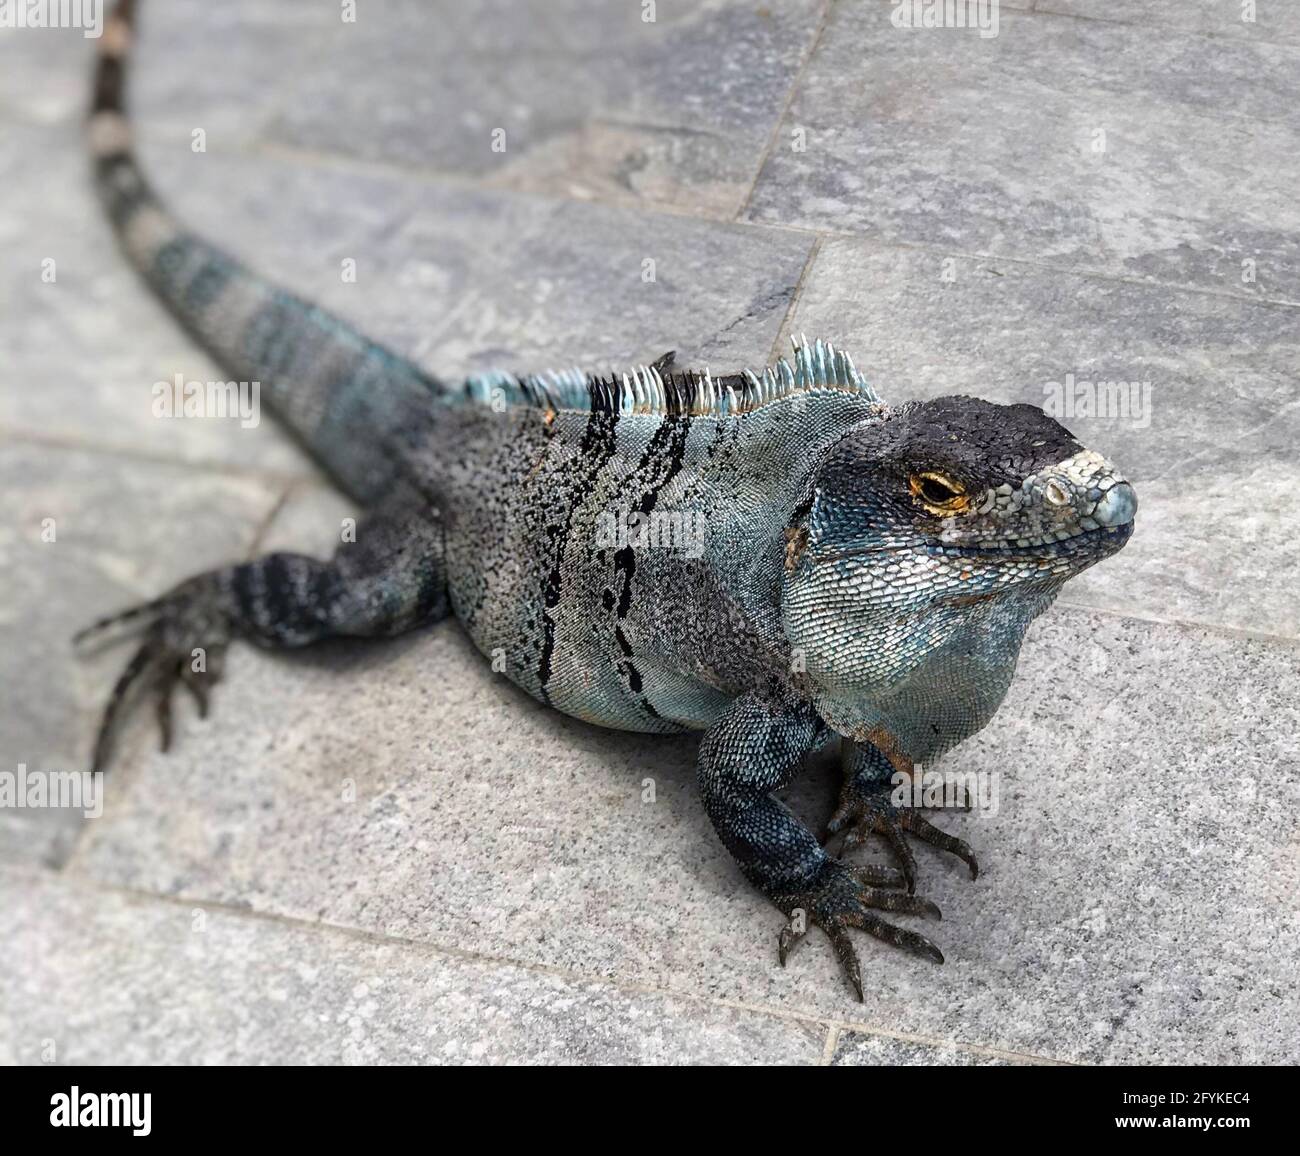 An iguana wanders onto to  a poolside patio at a resort in Costa Rica. Stock Photo